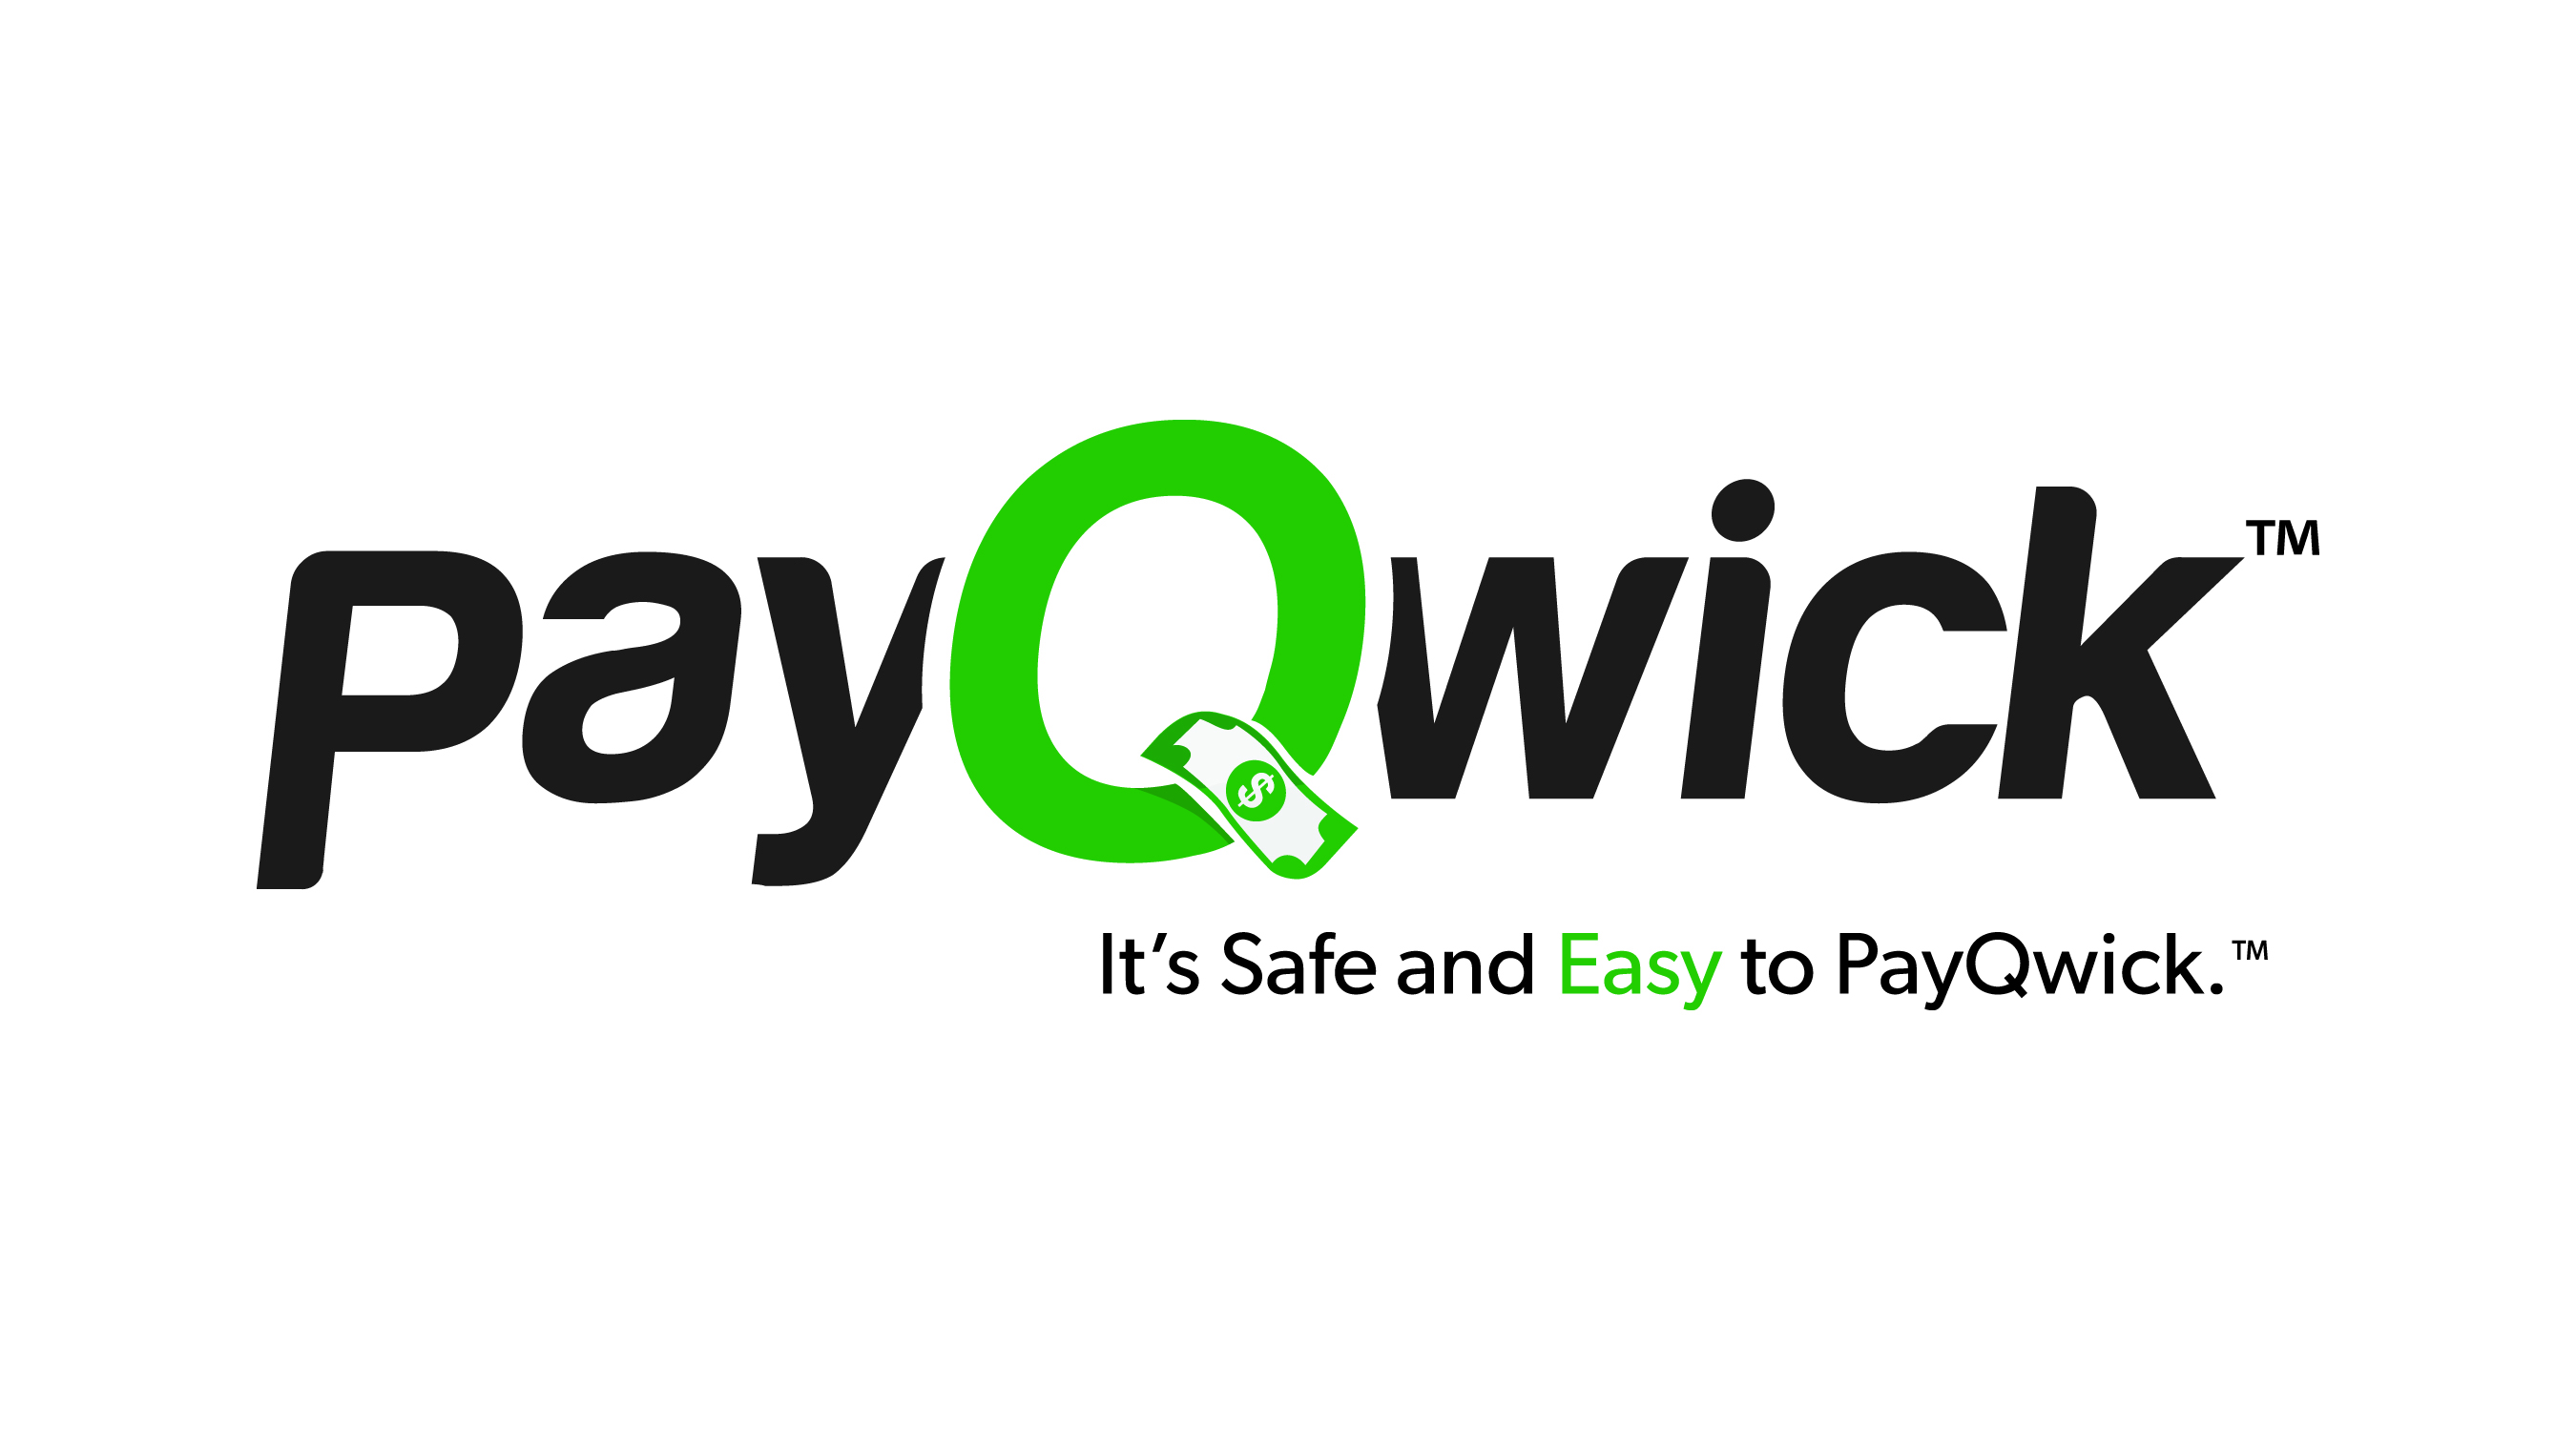 PayQwick Inc., the leader in seed-to-sale electronic payments for the legal marijuana industry